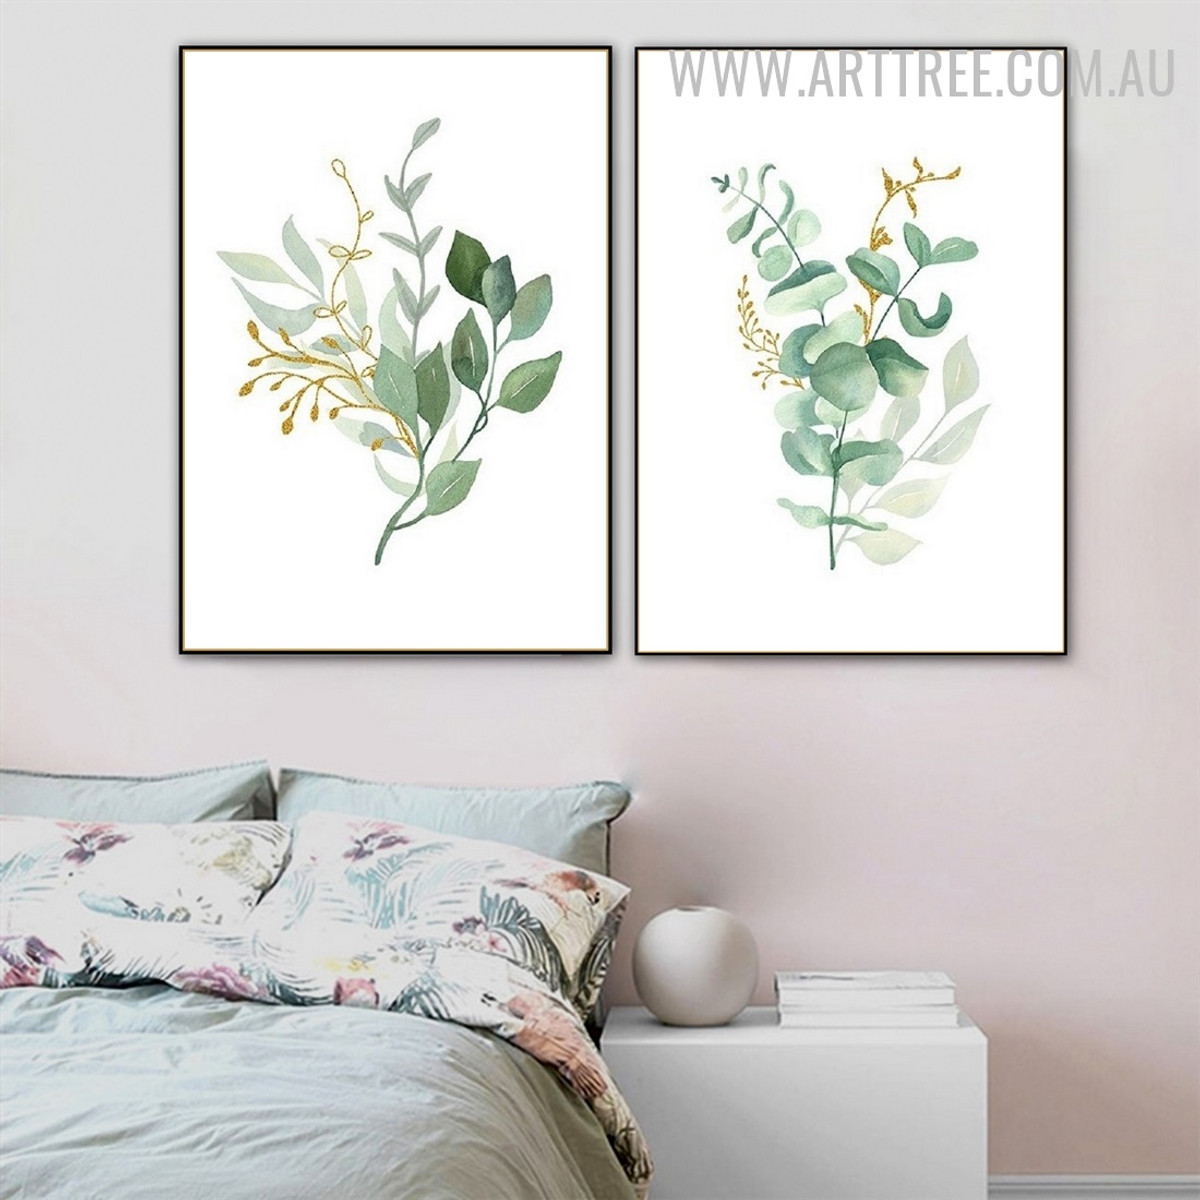 Motley Leaflets Abstract 2 piece Floral Watercolor Painting Picture Canvas Print for Room Wall Ornamentation